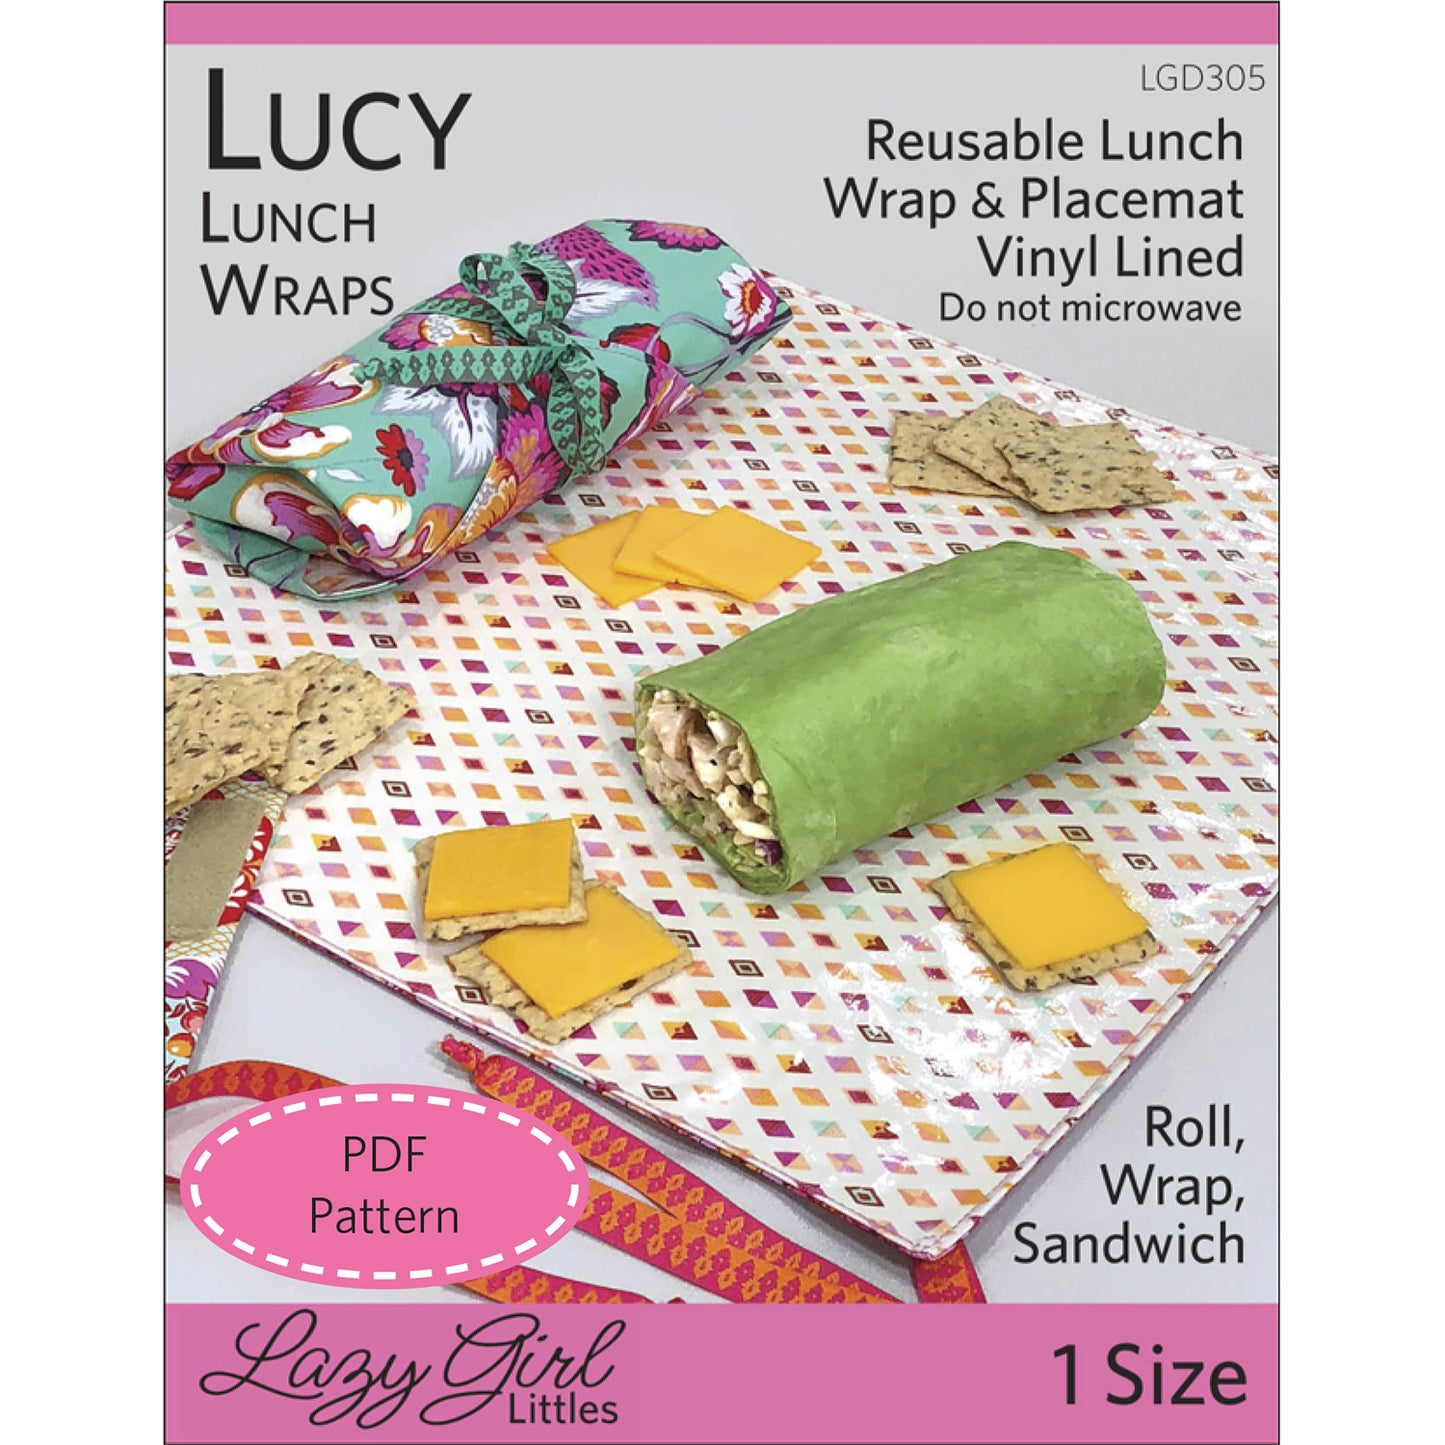 Lucy Lunch Wraps PDF Pattern